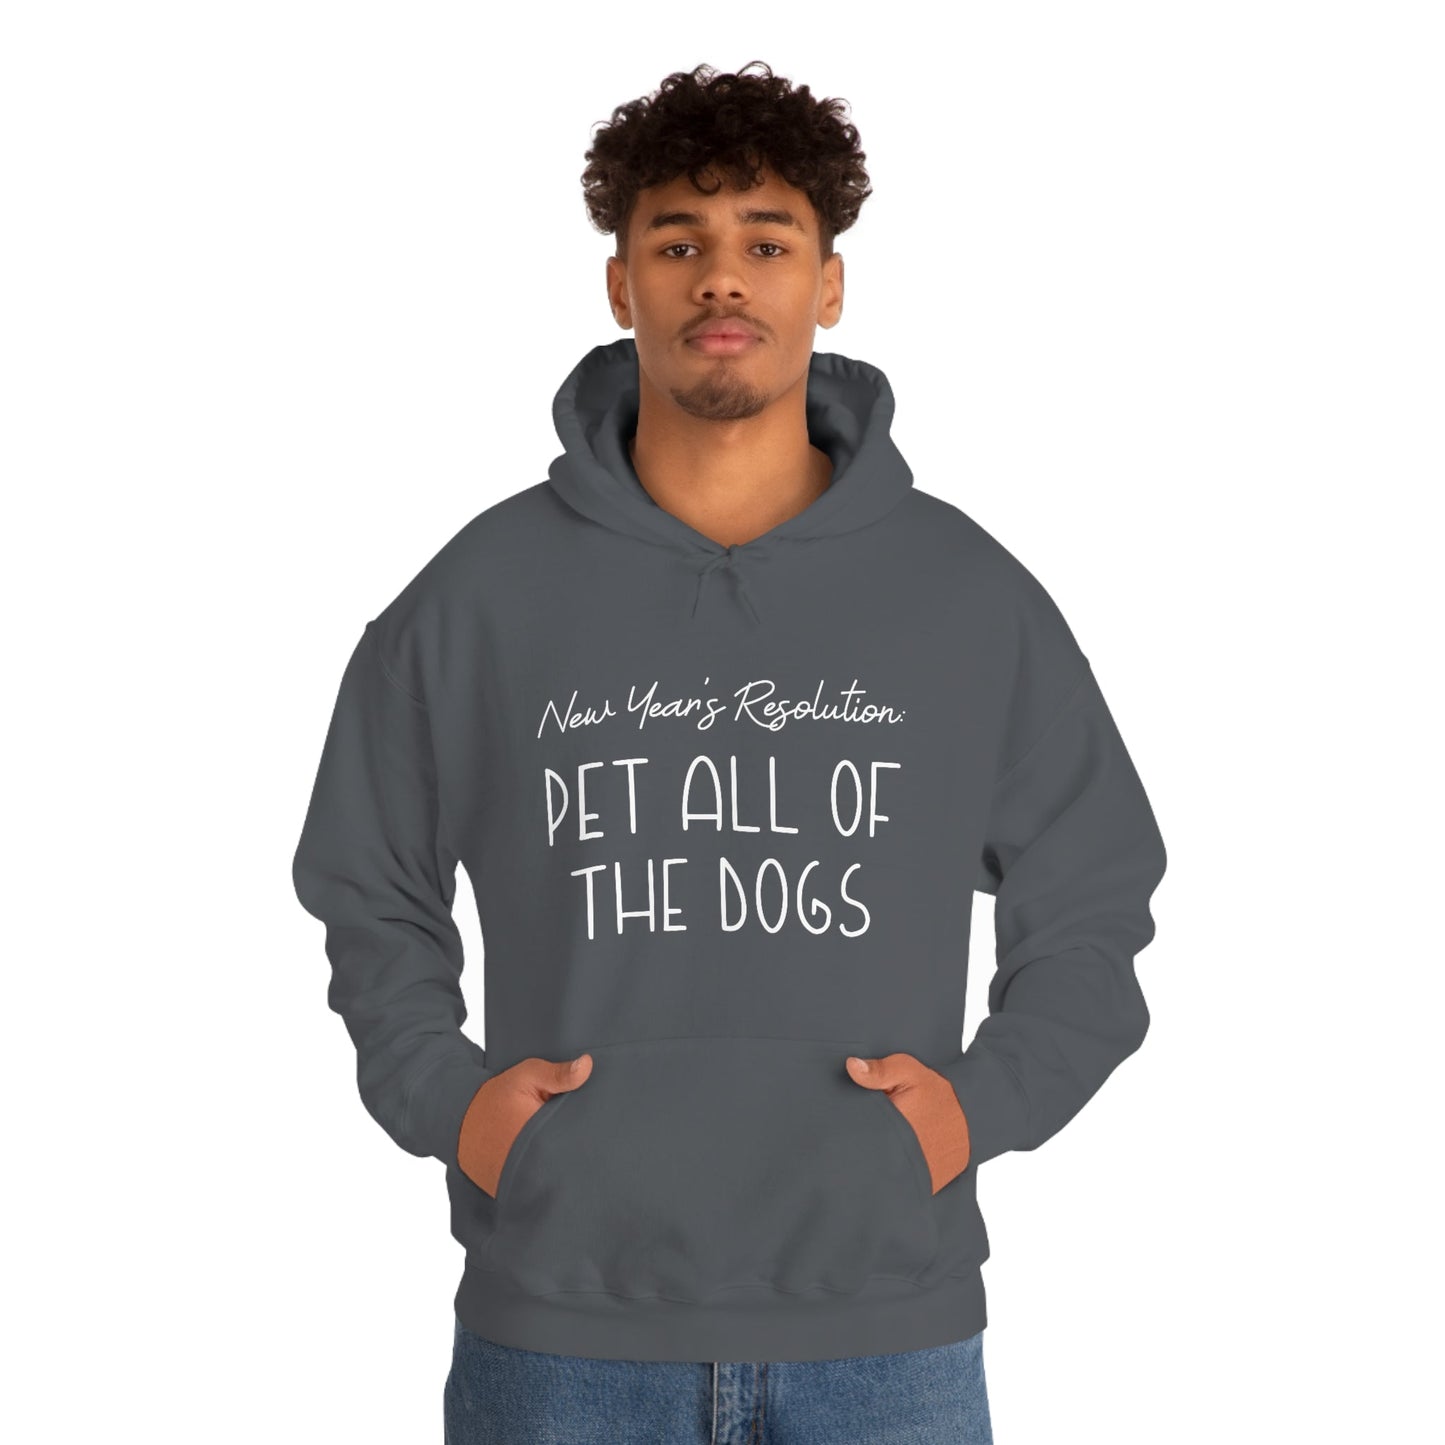 New Year's Resolution: Pet All Of The Dogs | Hooded Sweatshirt - Detezi Designs-12398380426352138248